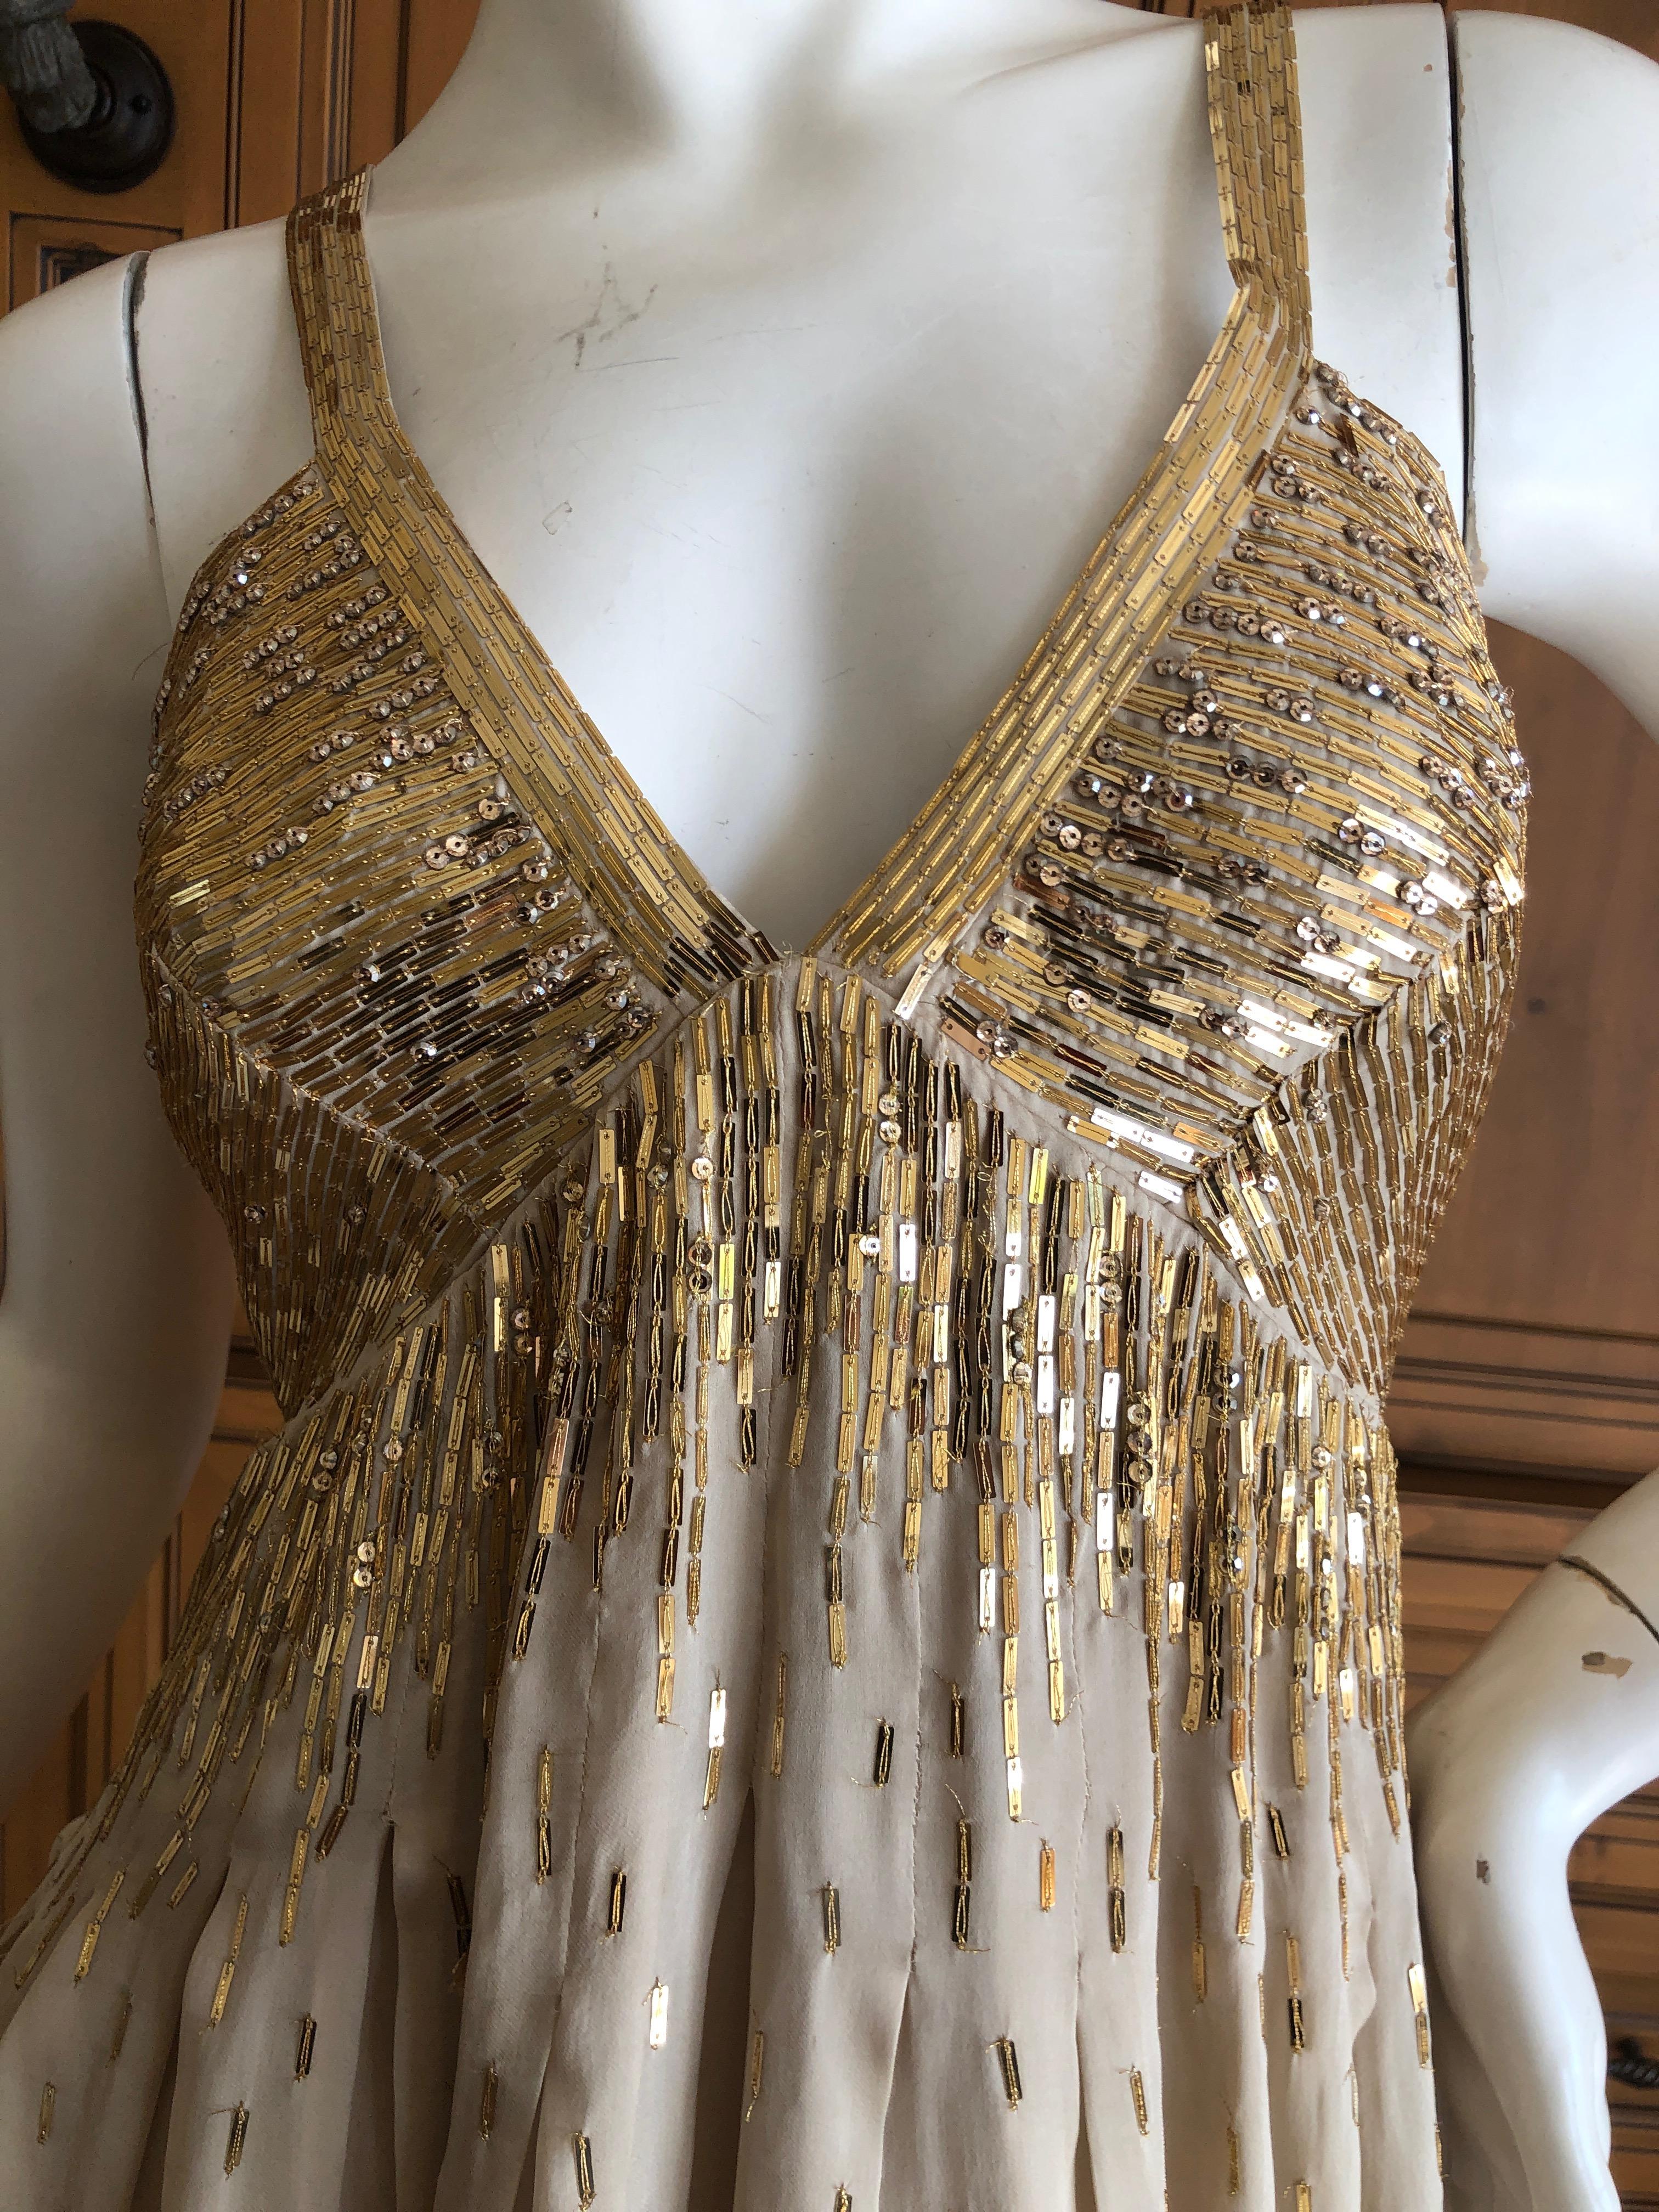 Roberto Cavalli Vintage Gold Silk Sequin Babydoll Mini Dress
This is stunning , but difficult to capture in photos.
Size 40
Bust 36